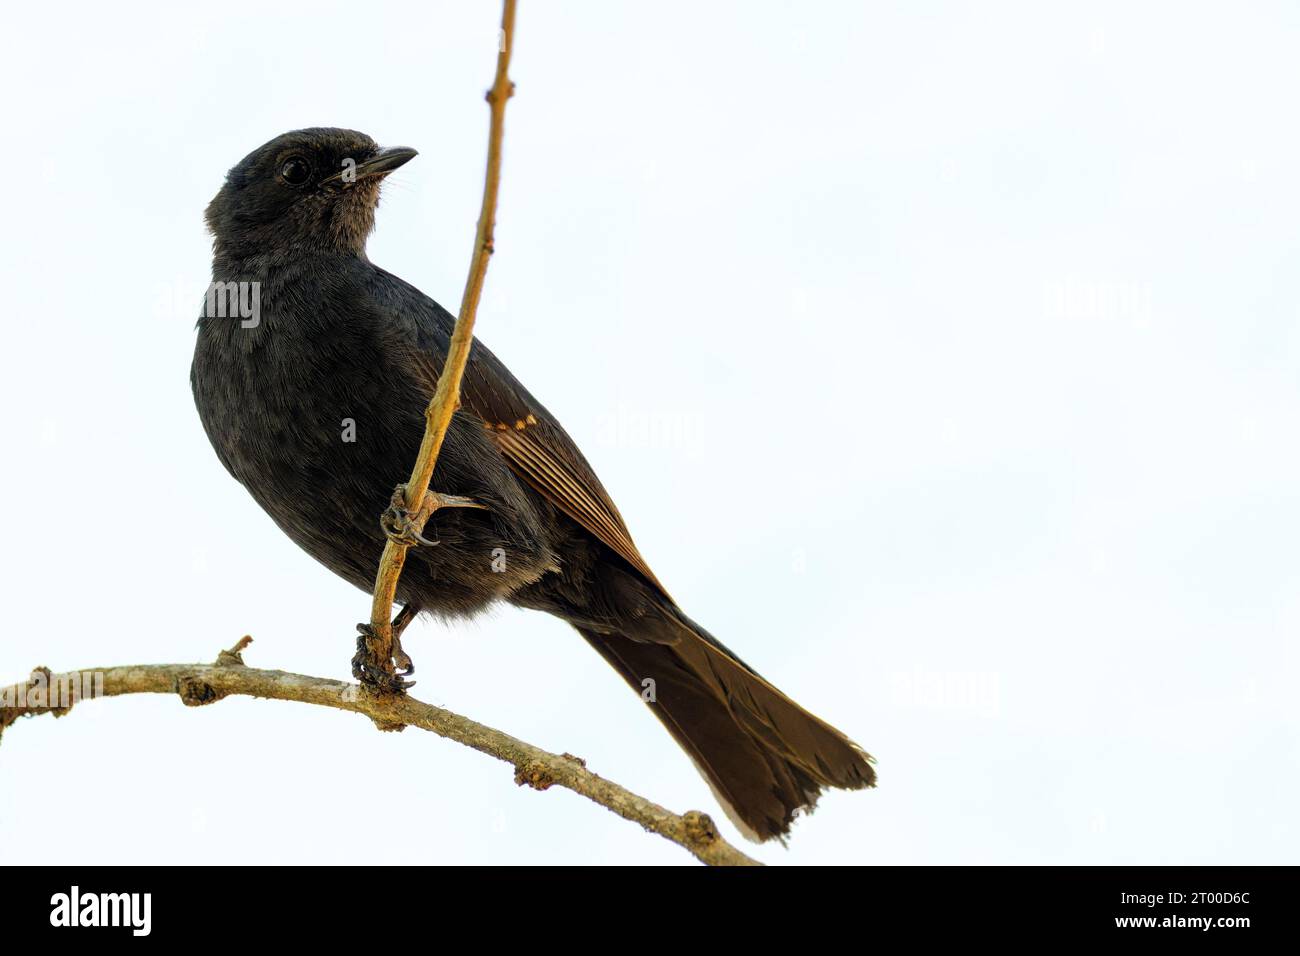 Southern black flycatcher (Melaenornis pammelaina) perched on a twig, Mpumalanga, South Africa. Stock Photo